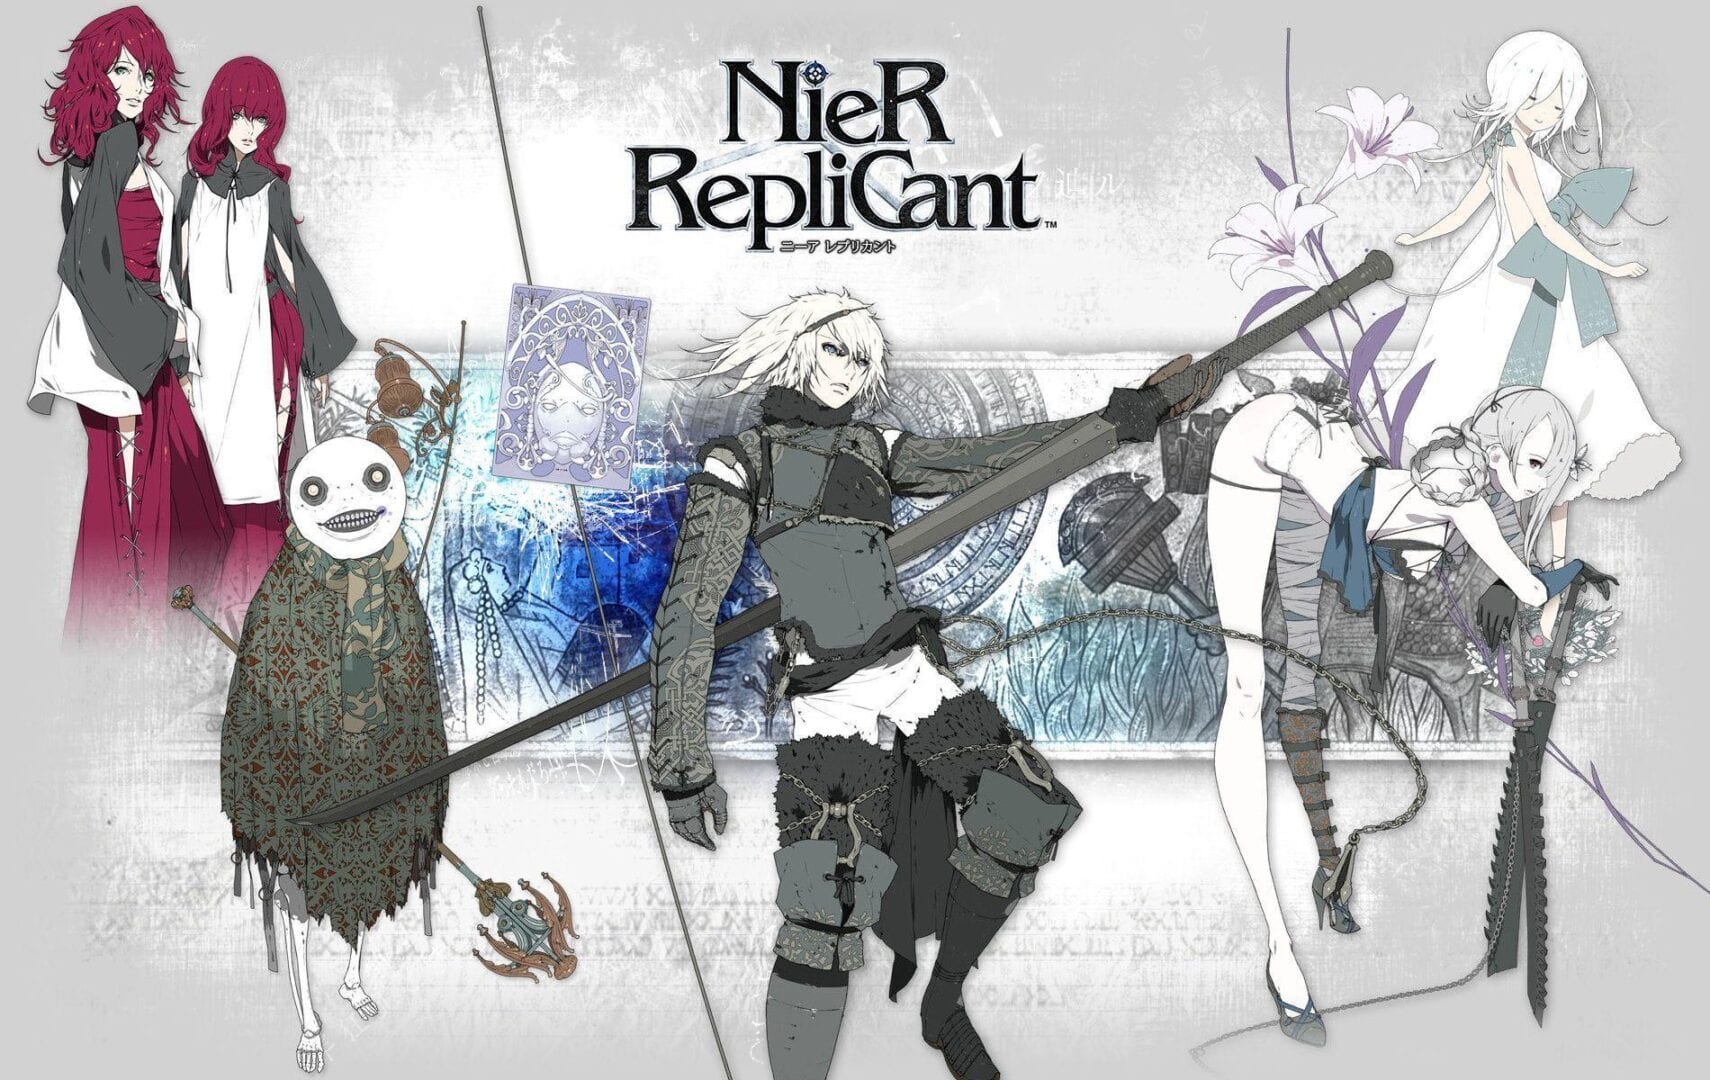 10 4k Hd Nier Replicant Wallpapers Perfect For Your Next Desktop Background